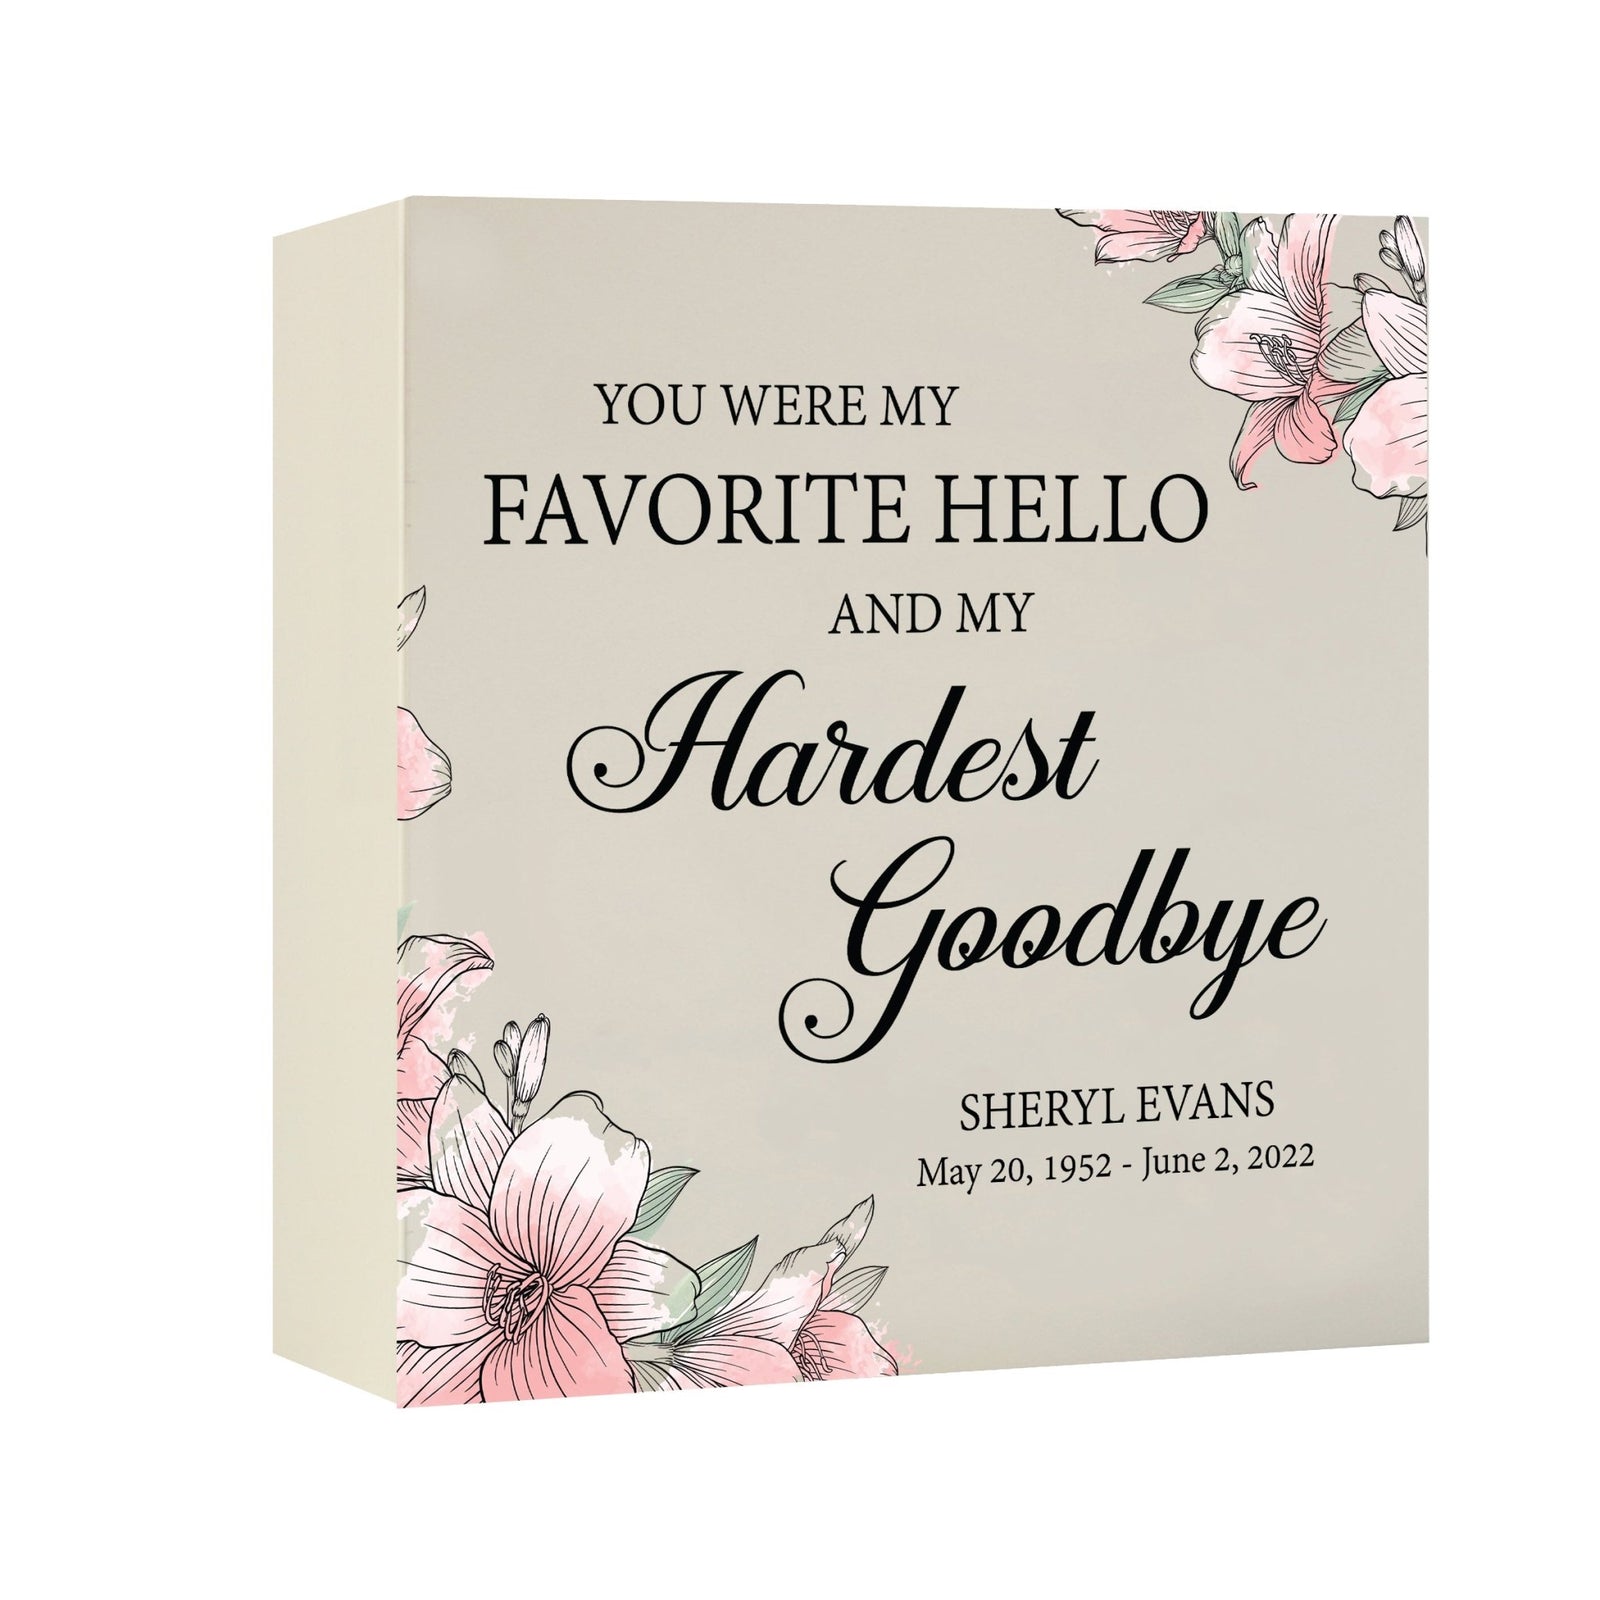 Timeless Human Memorial Shadow Box Urn With Inspirational Verse in Ivory - You Were My Favorite Hello - LifeSong Milestones